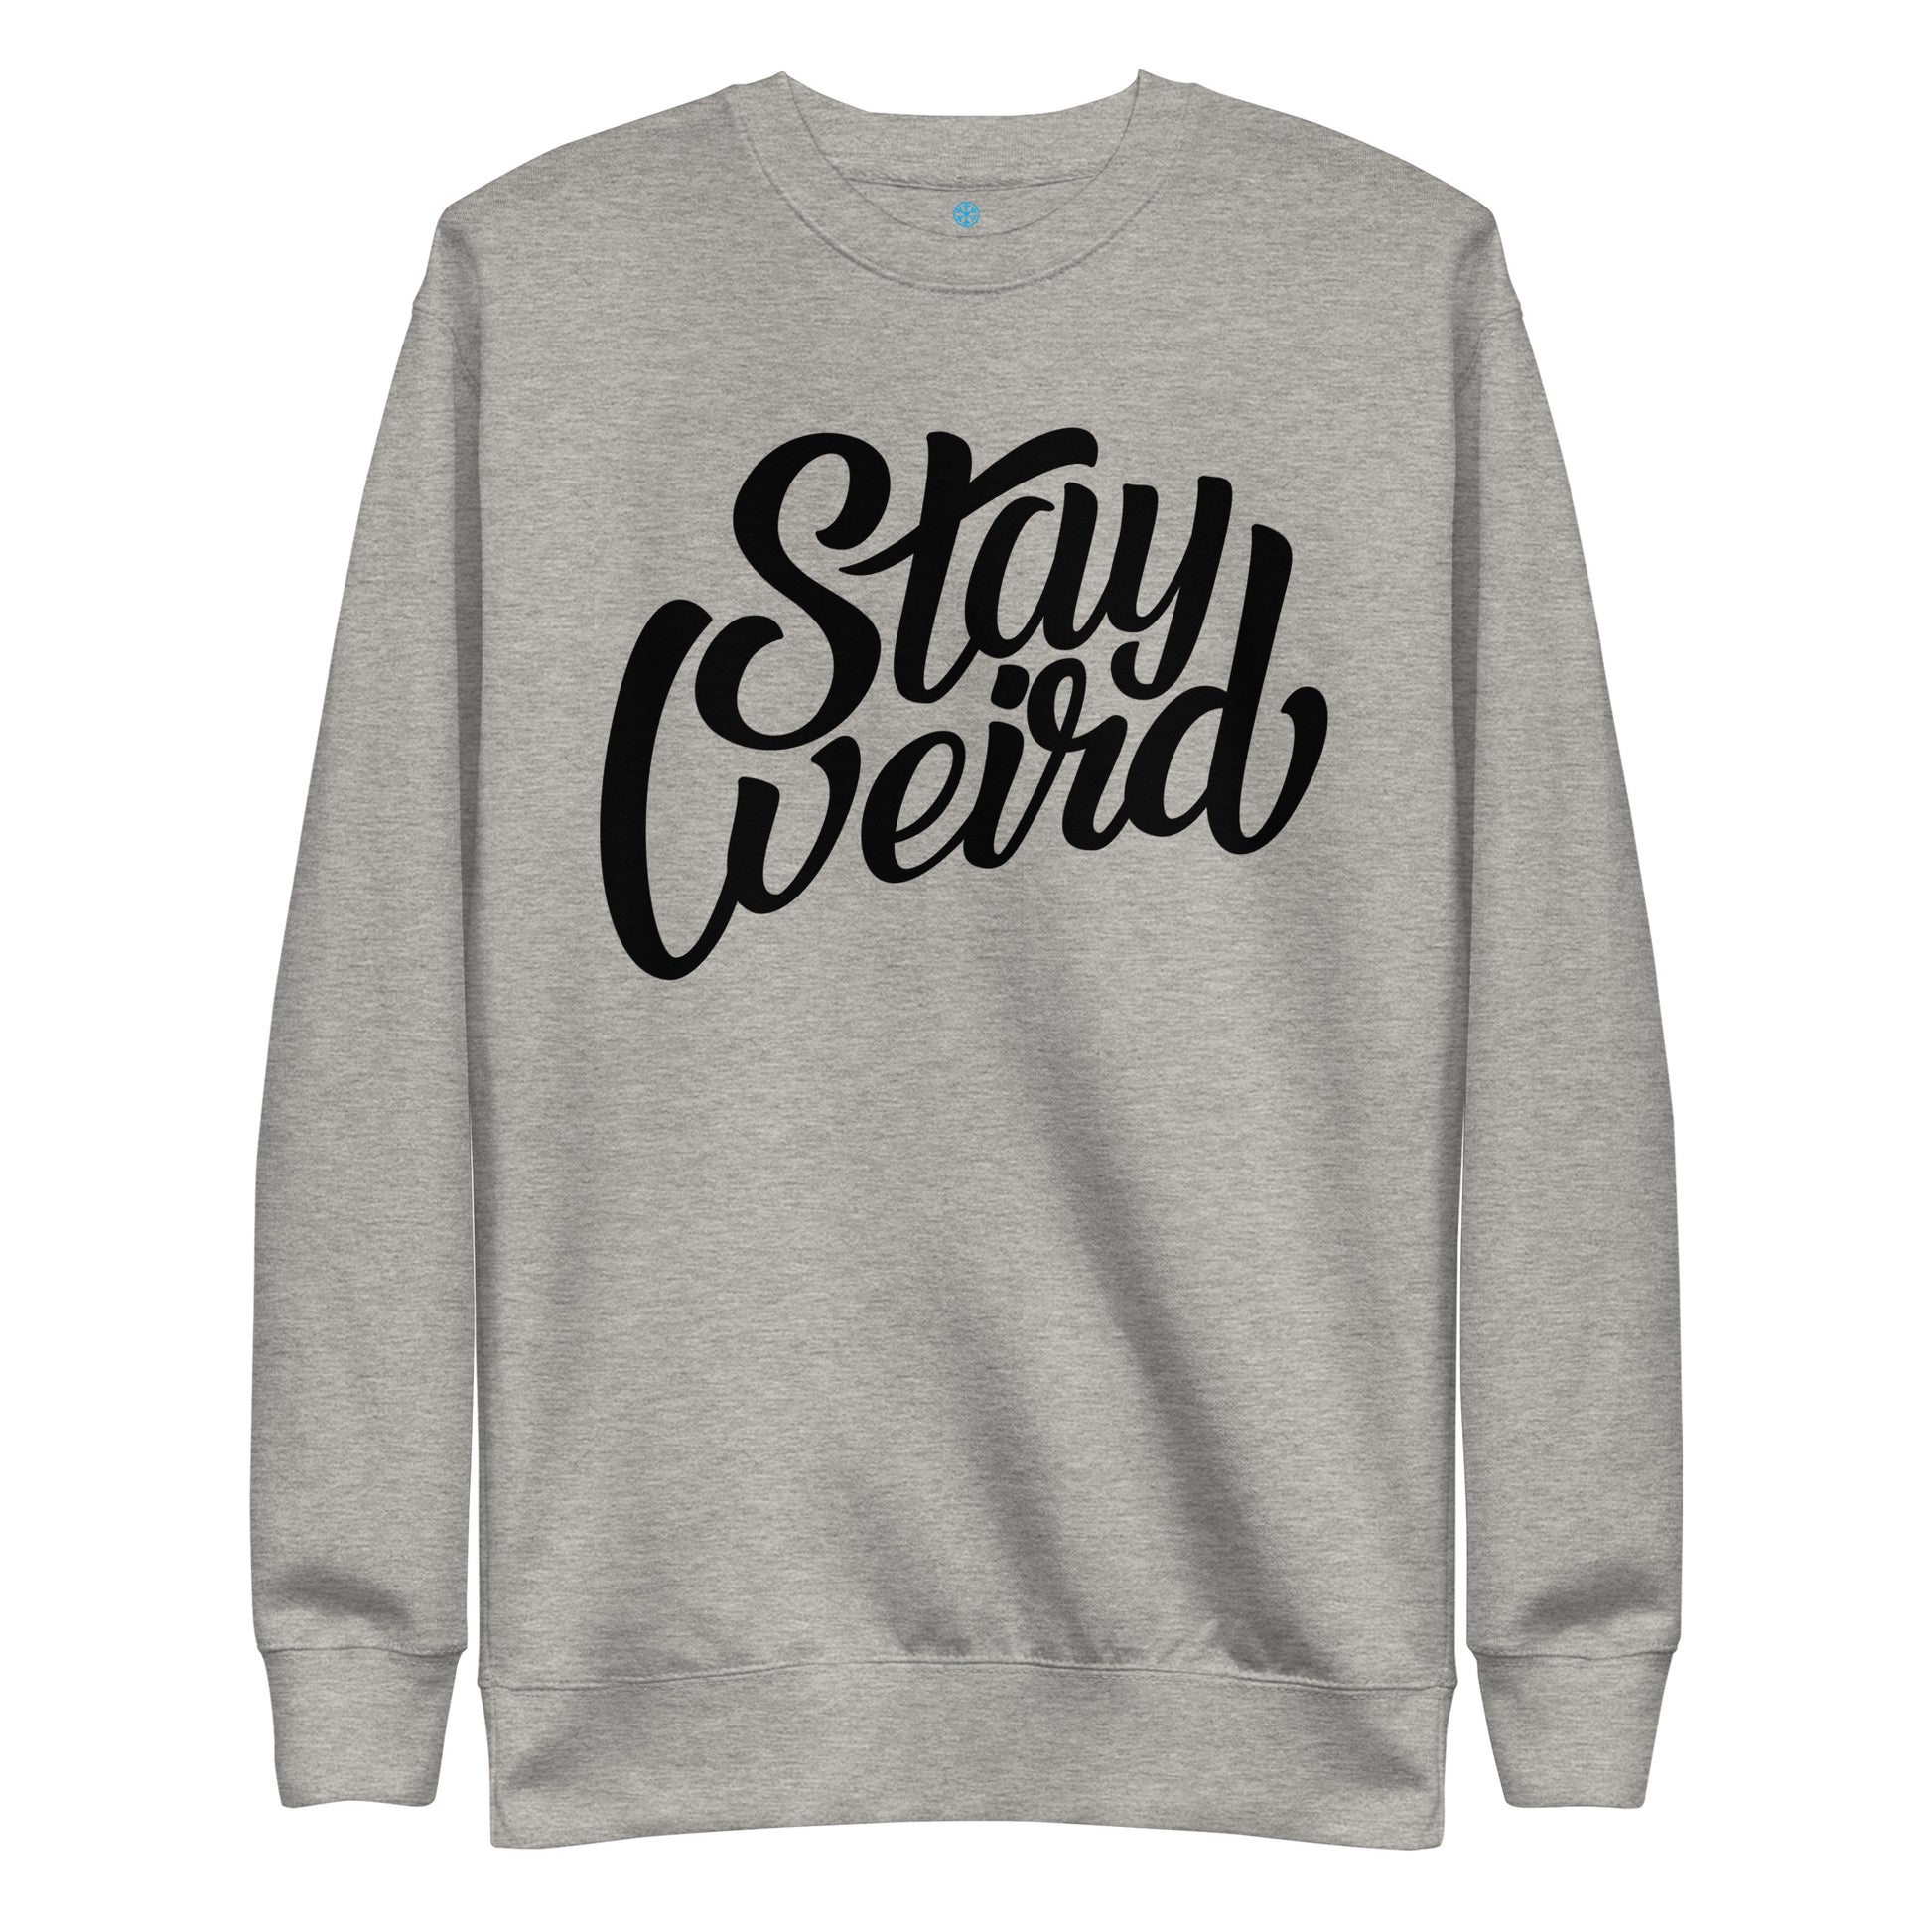 sweatshirt Stay Weird gray by B.Different Clothing independent streetwear brand inspired by street art graffiti